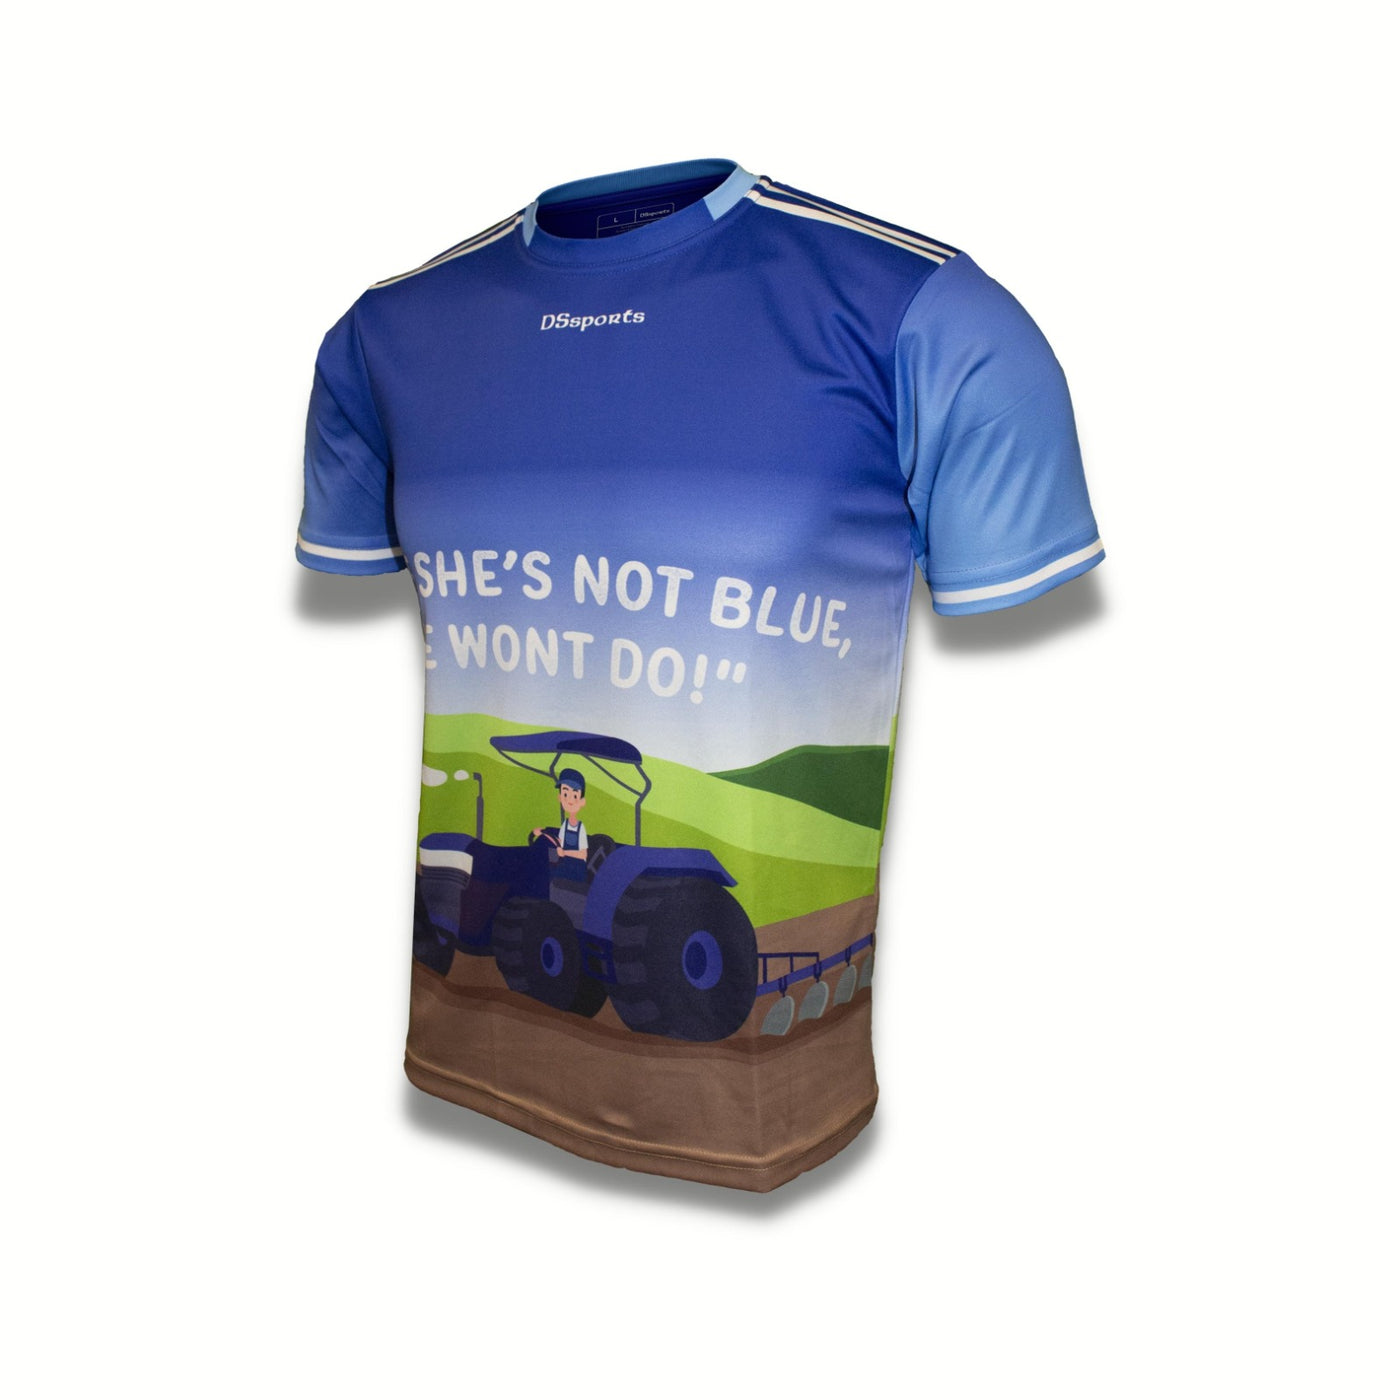 Show Jersey - "If She's Not Blue, She Won't Do"